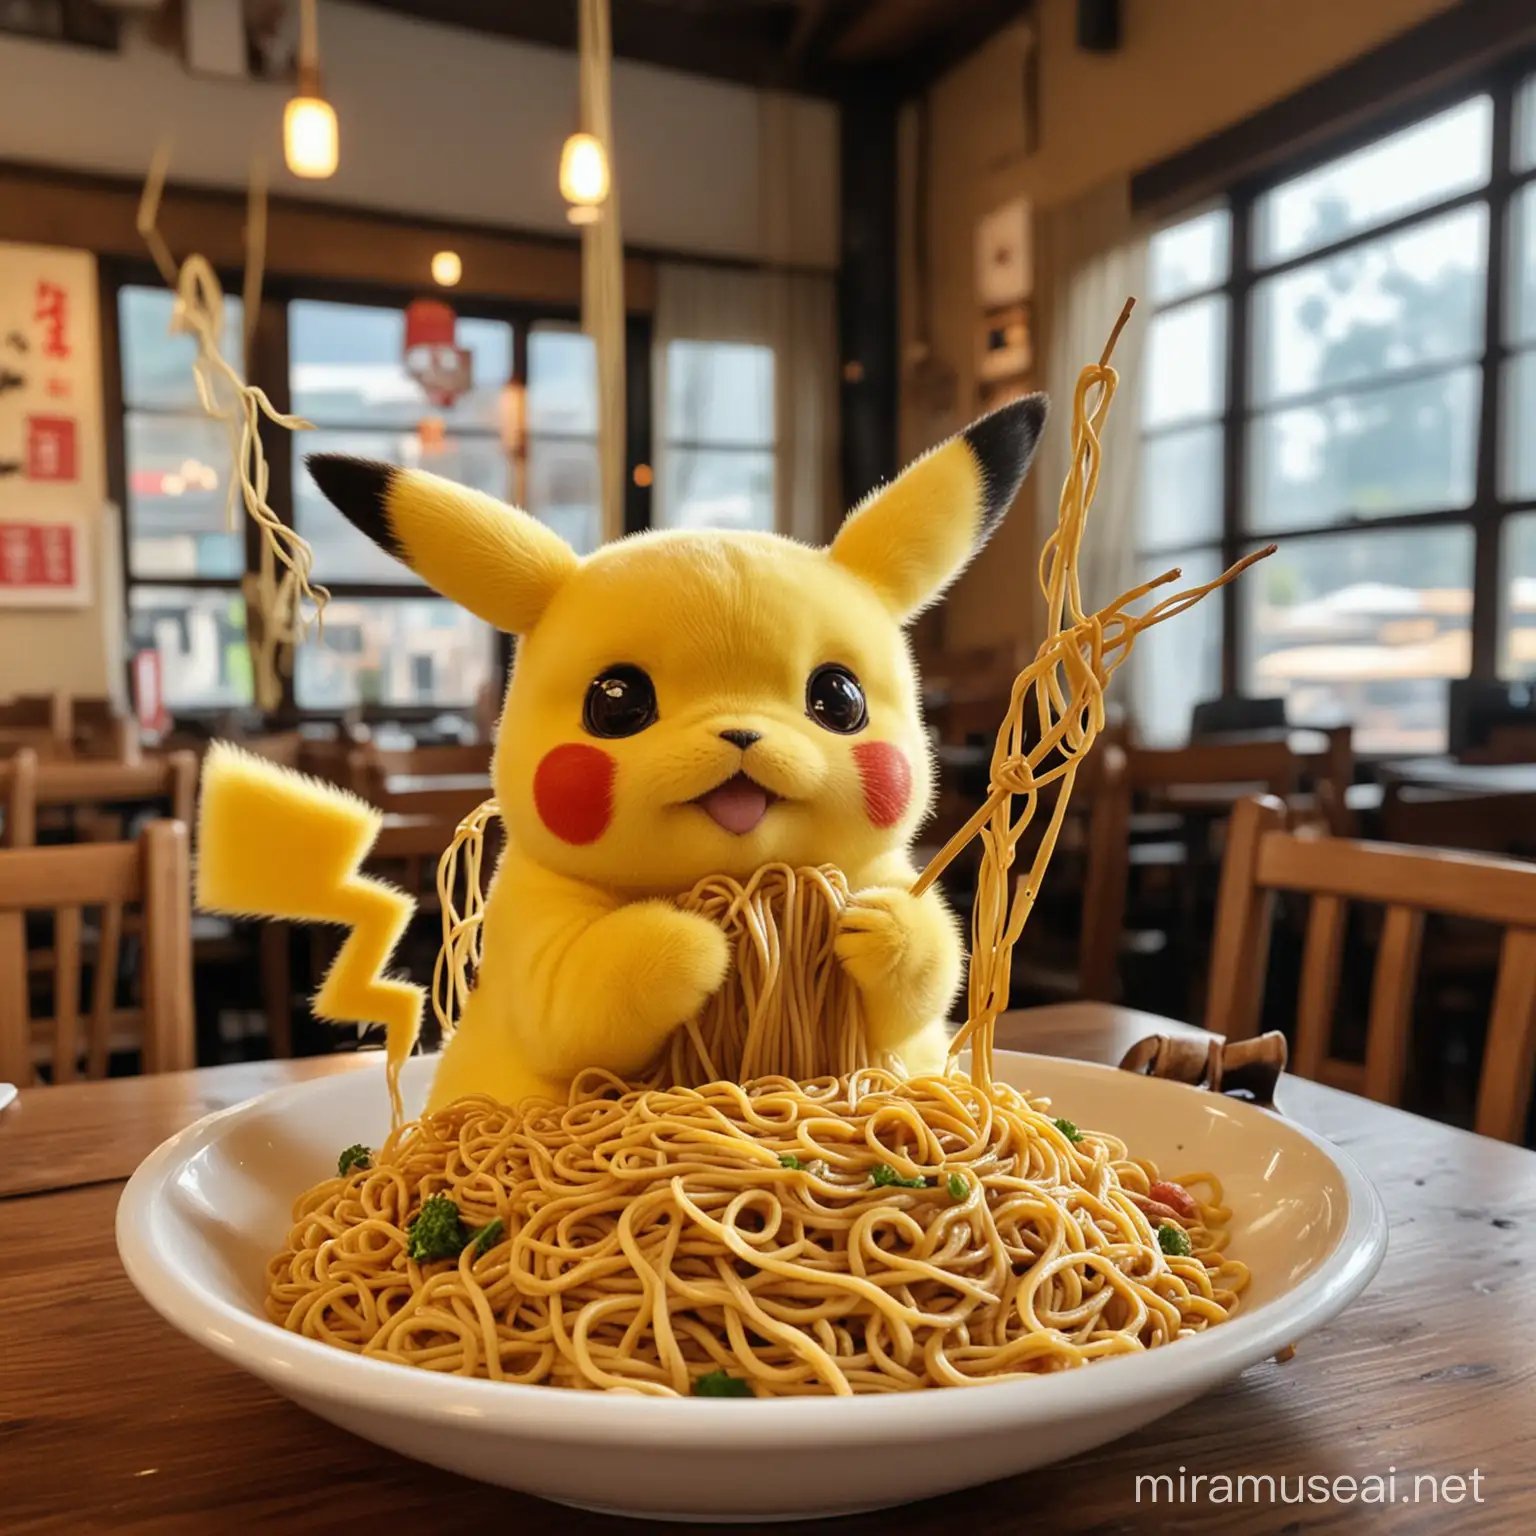 Pikachu Enjoying Traditional Noodles with Chopsticks in a Vibrant Restaurant Setting